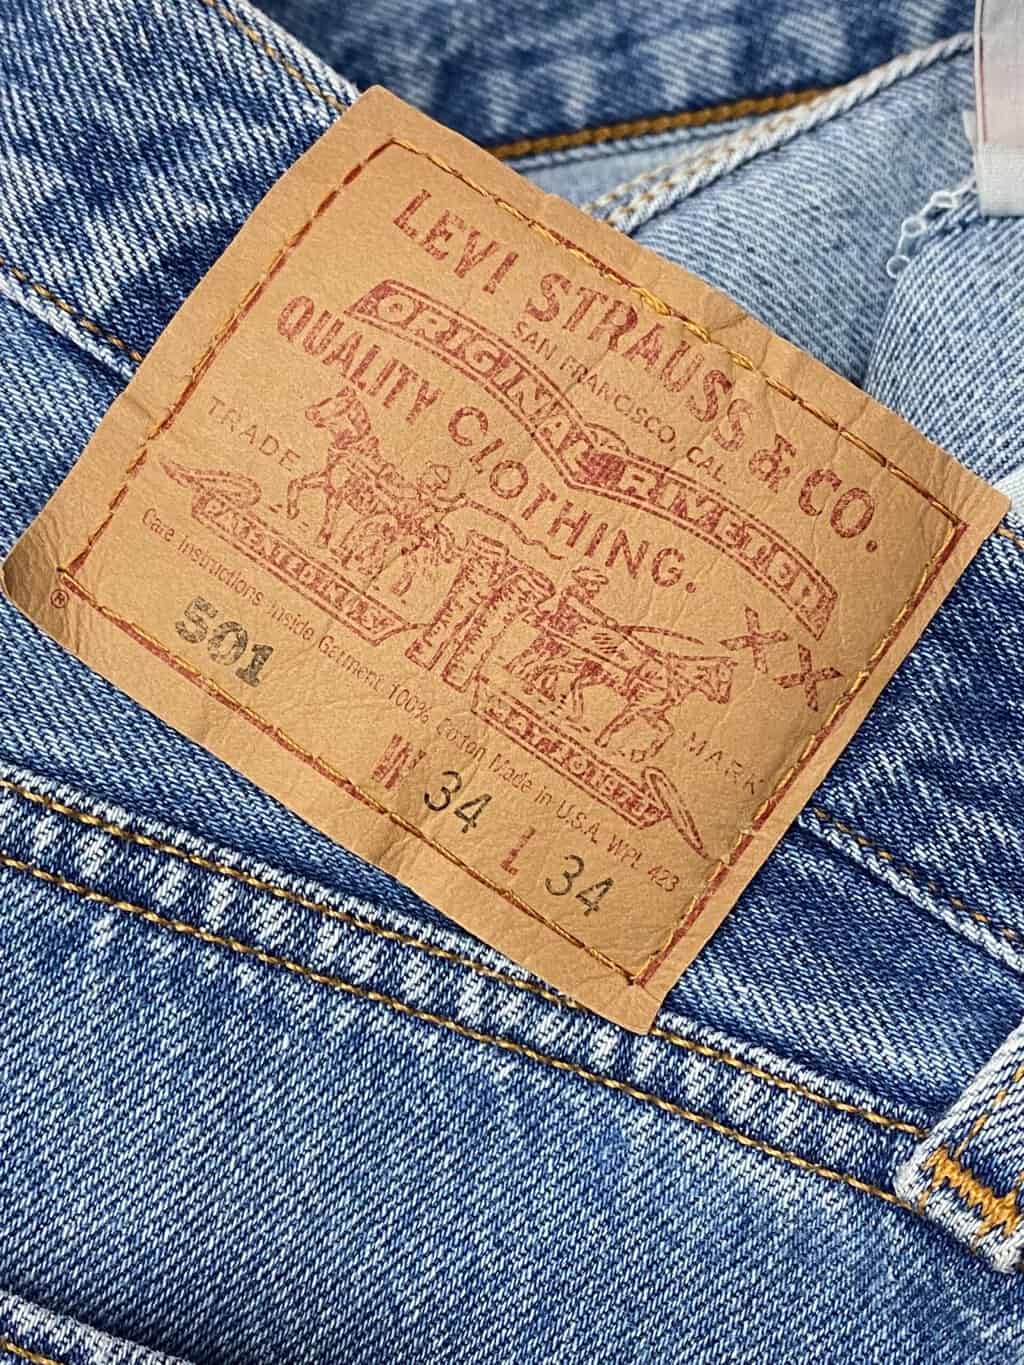 90s vintage Levis 501 jeans USA made blue stonewash with red tab - W33 x  L34 - St Cyr Vintage